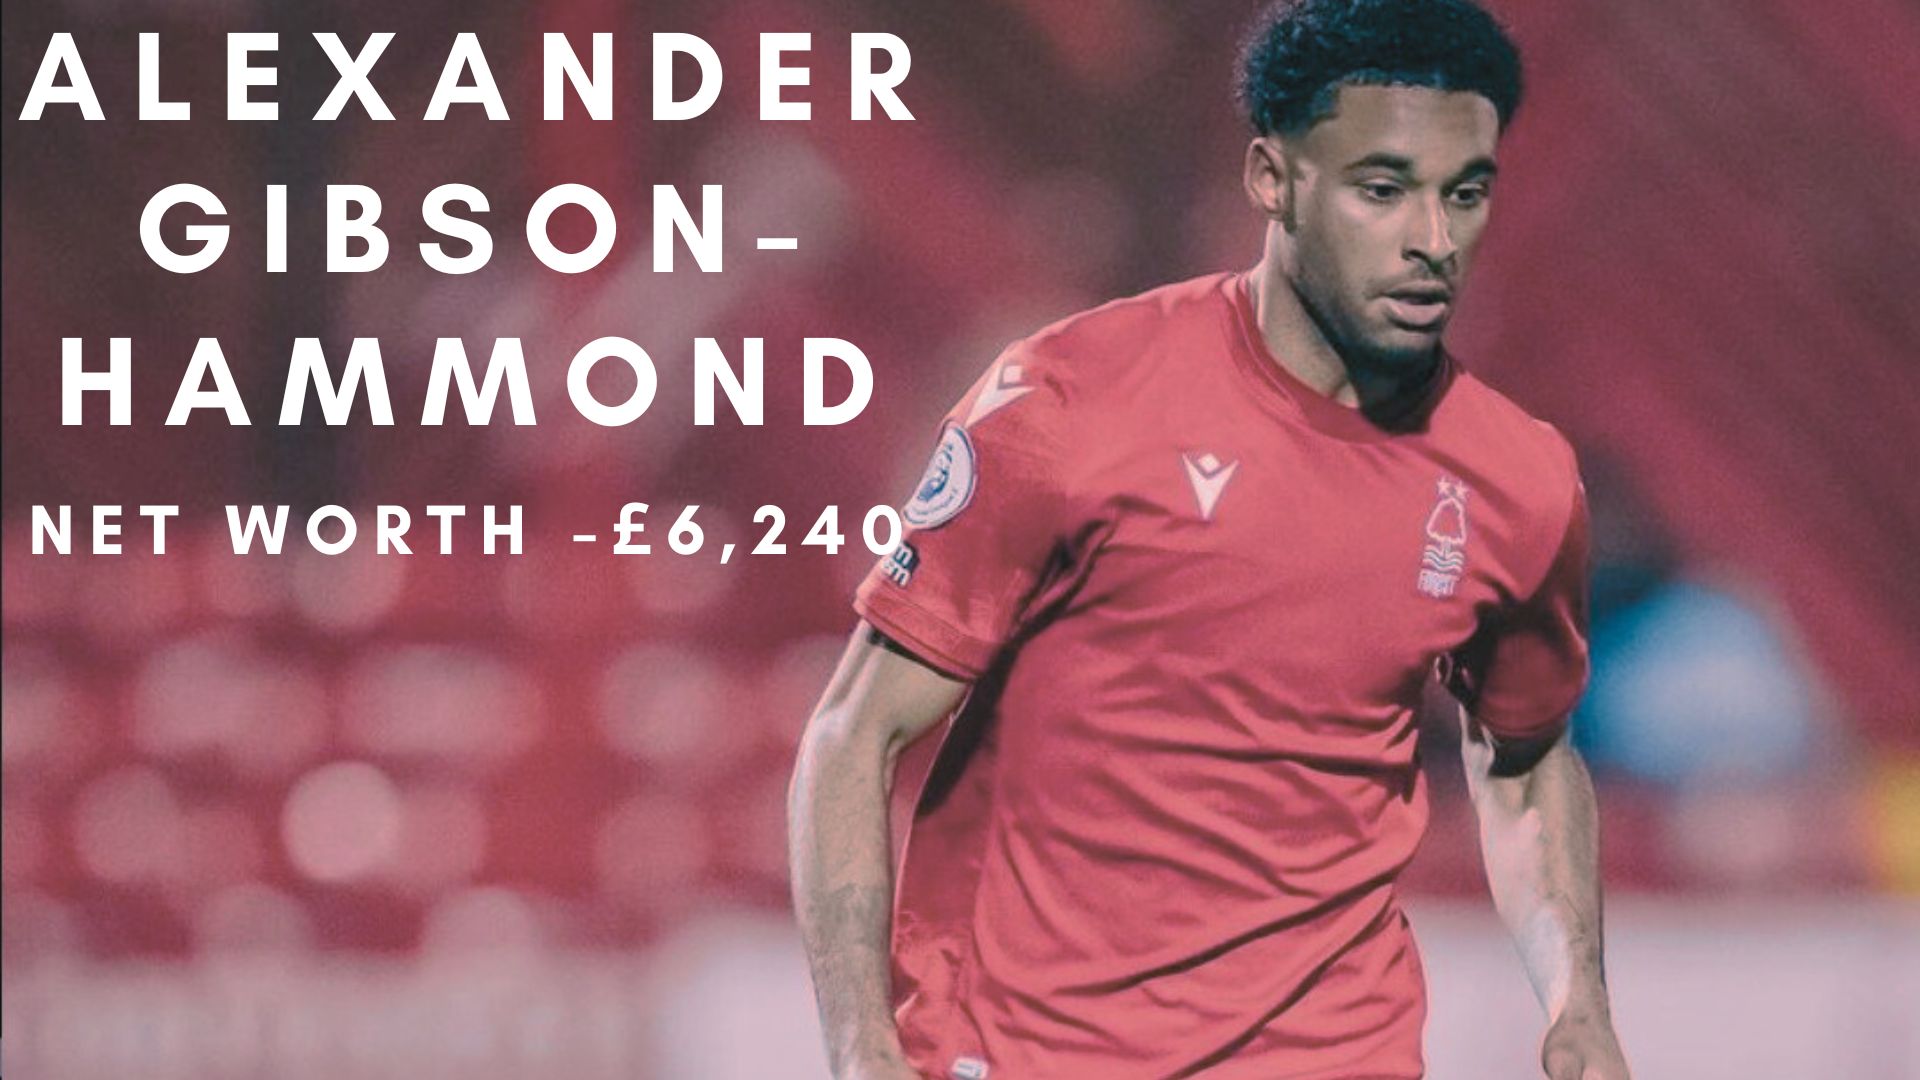 Alexander Gibson-Hammond plays as a midfielder for Nottingham Forest in the Premier League. (Credits: @a.monroe08 Instagram)